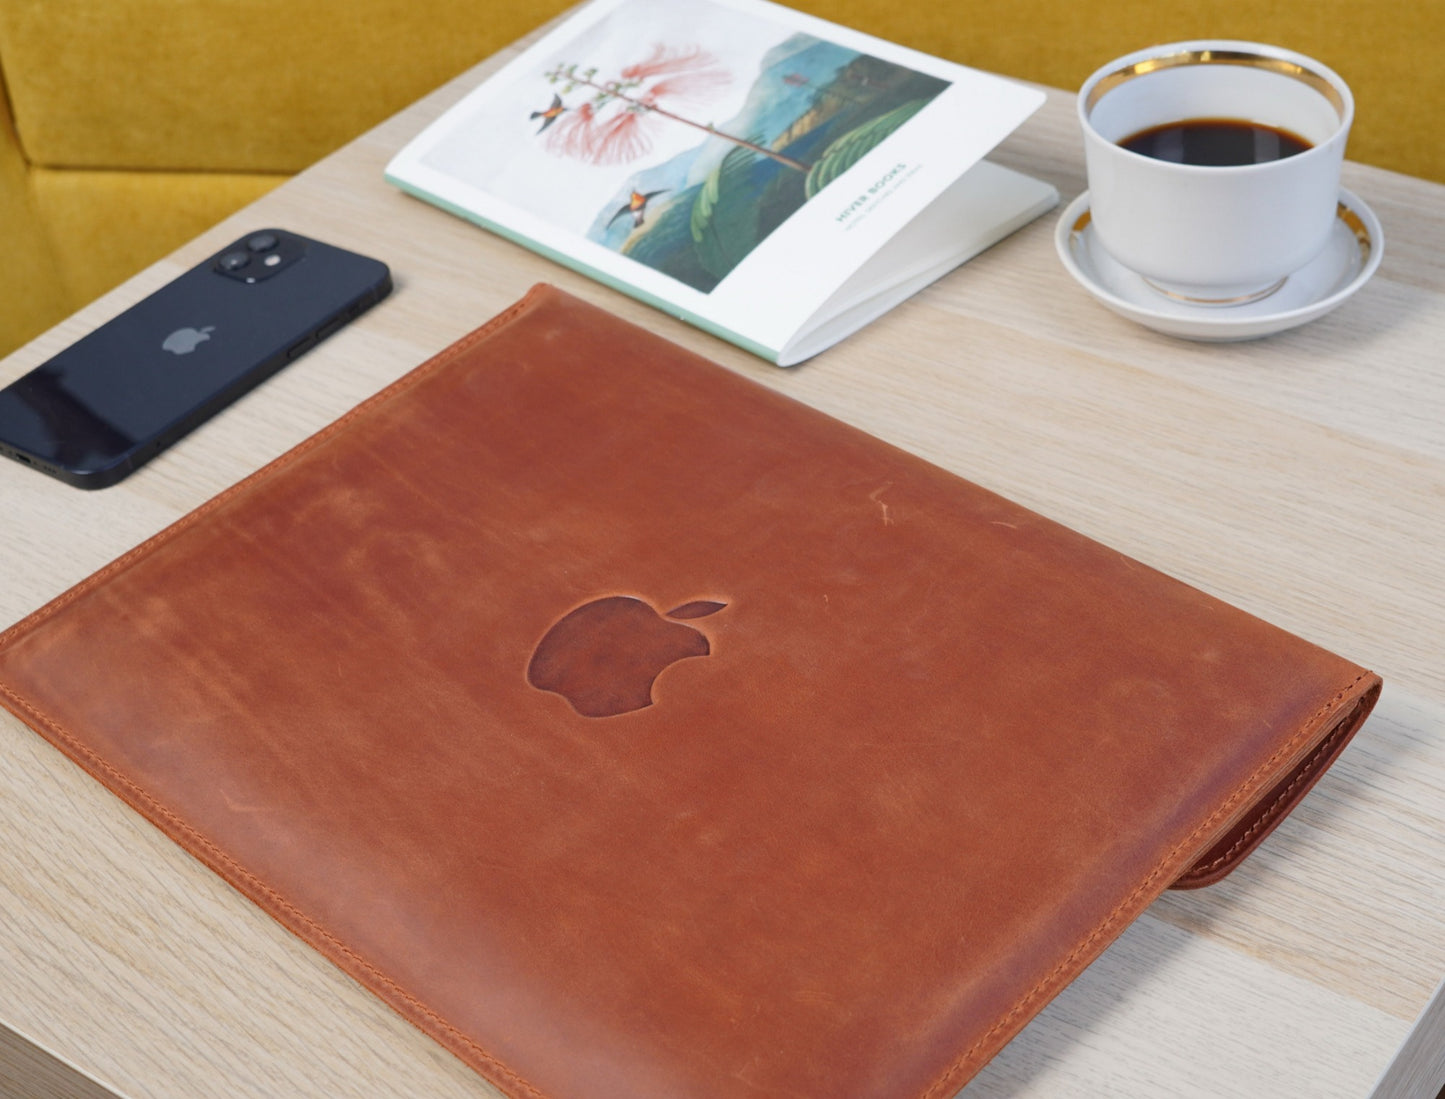 leather case for macbookVintage Leather Case For M1 M2 Macbook Air Pro with Magnets 13/ 14/15 inch